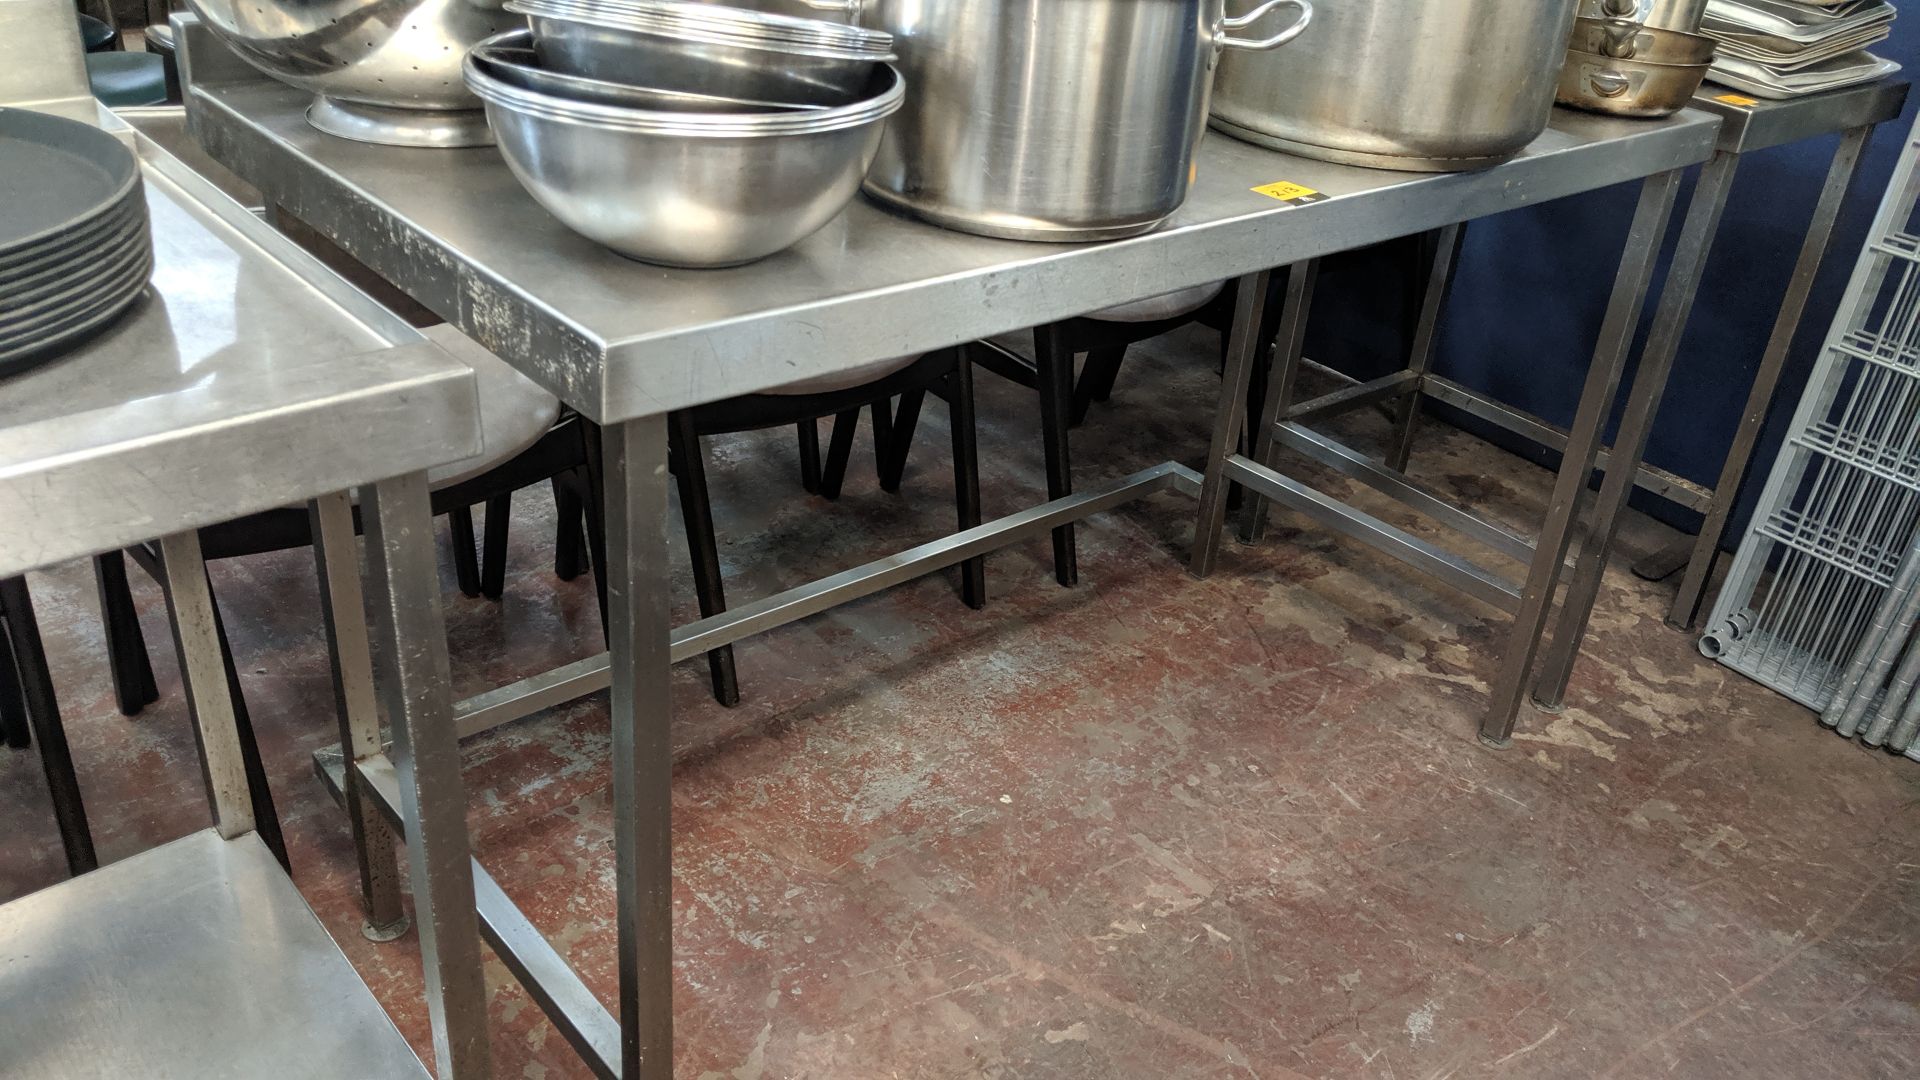 Stainless steel table circa 1450mm x 700mm IMPORTANT: Please remember goods successfully bid upon